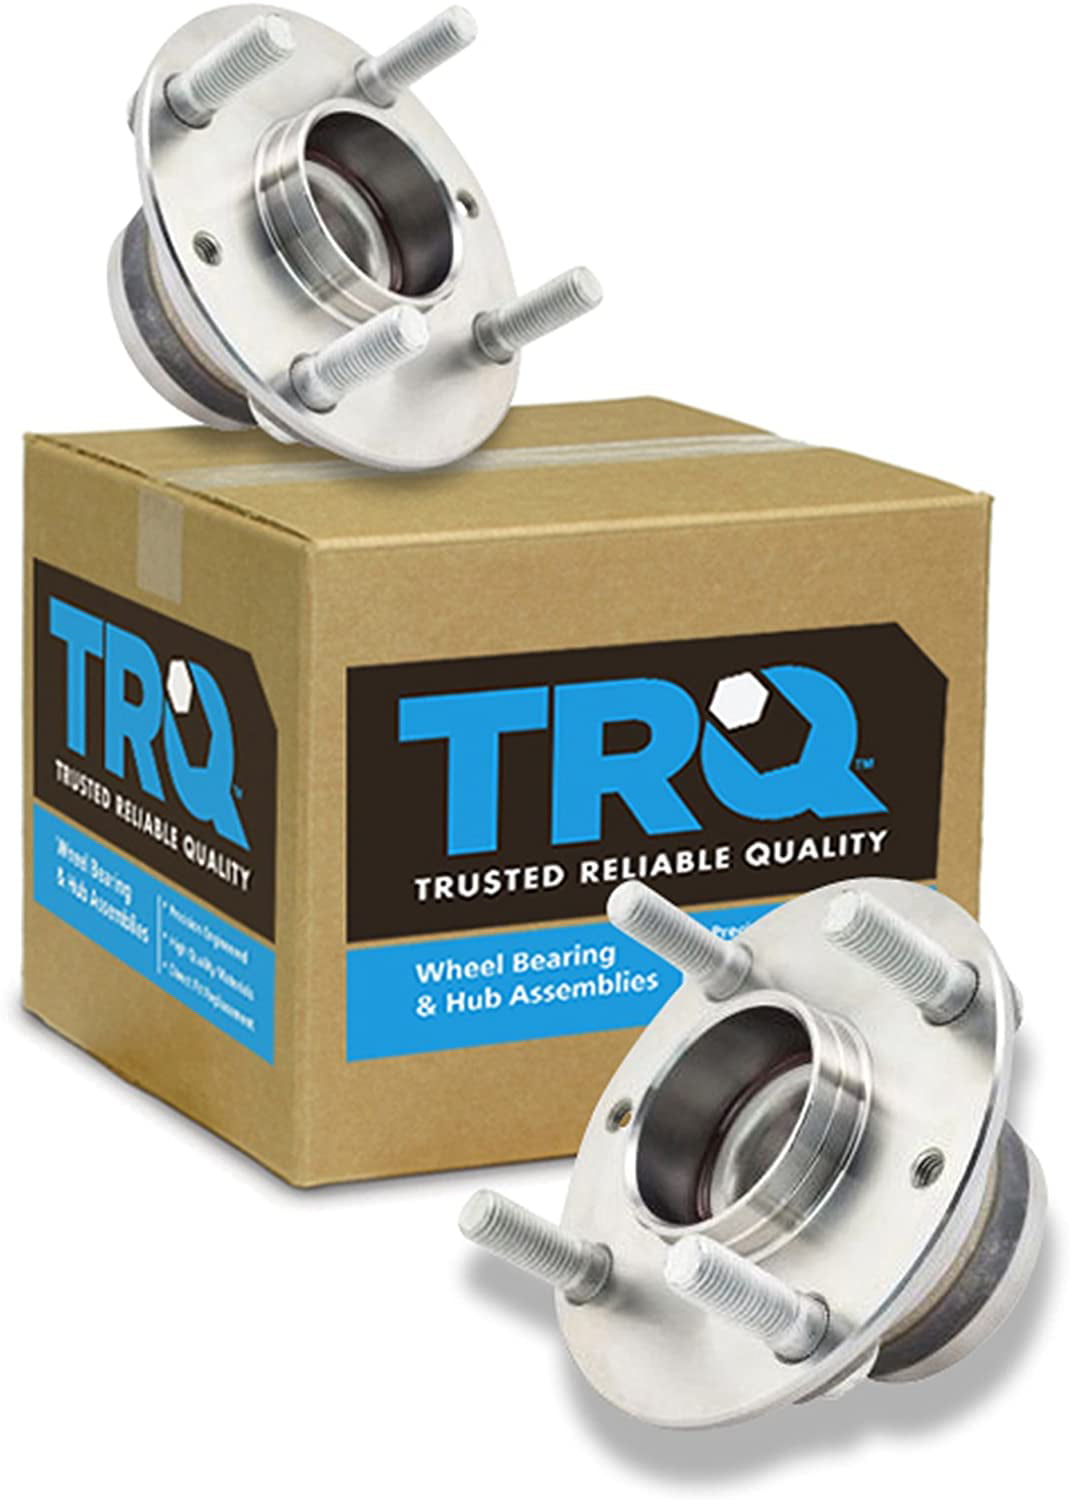 TRQ Rear Wheel Bearing & Hub for models with ABS Brakes